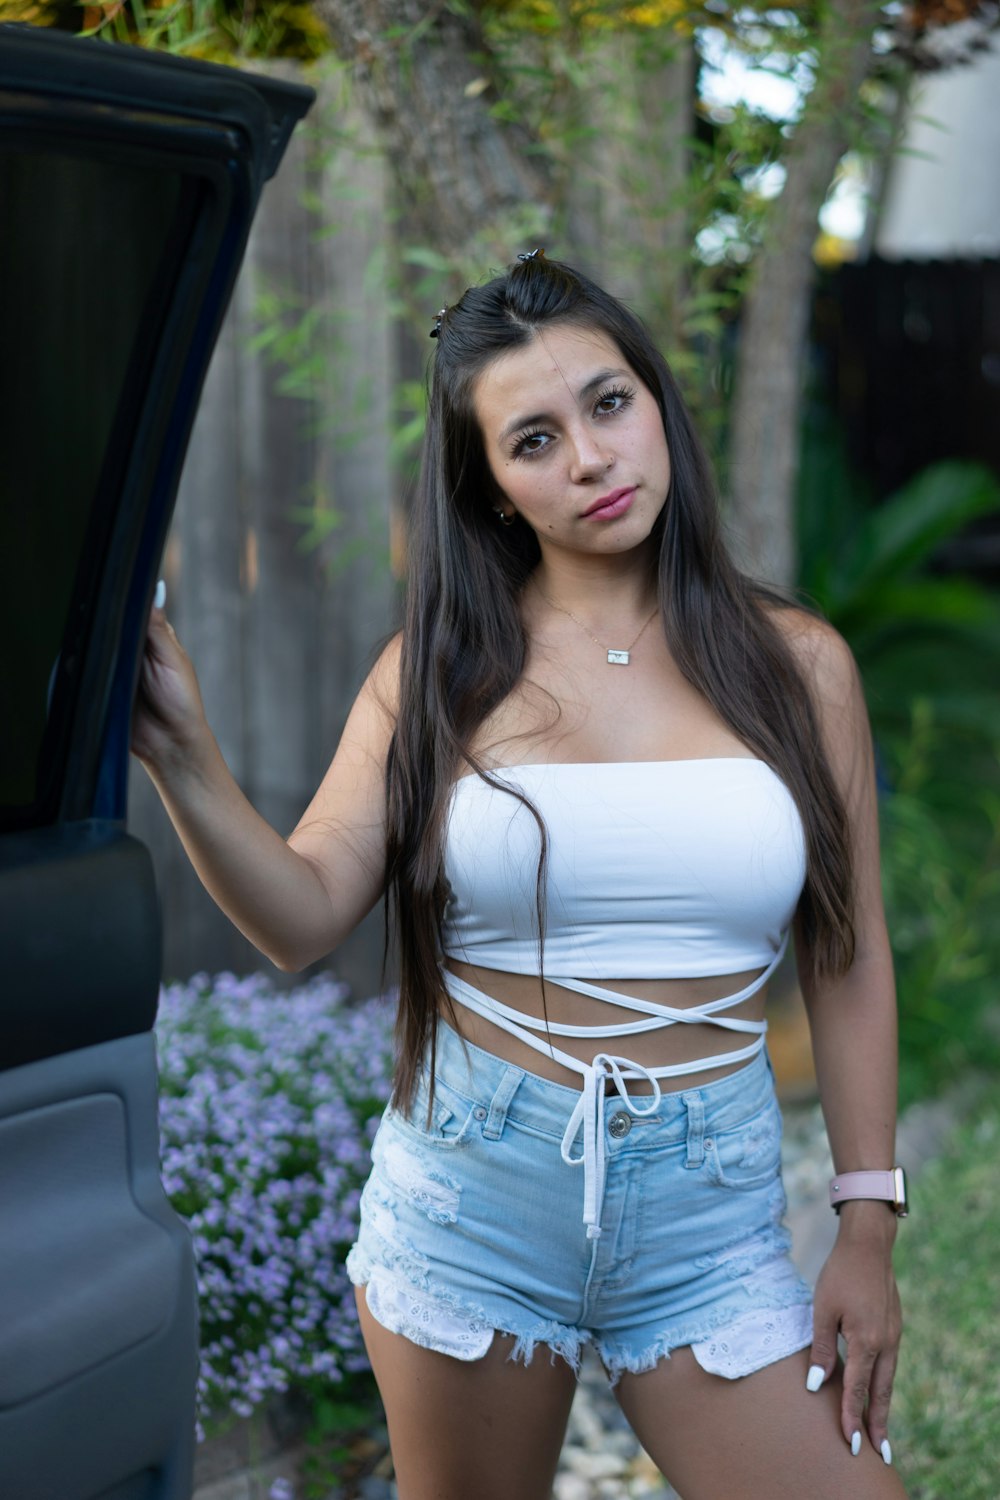 woman in white tank top and blue denim shorts standing beside car door during daytime